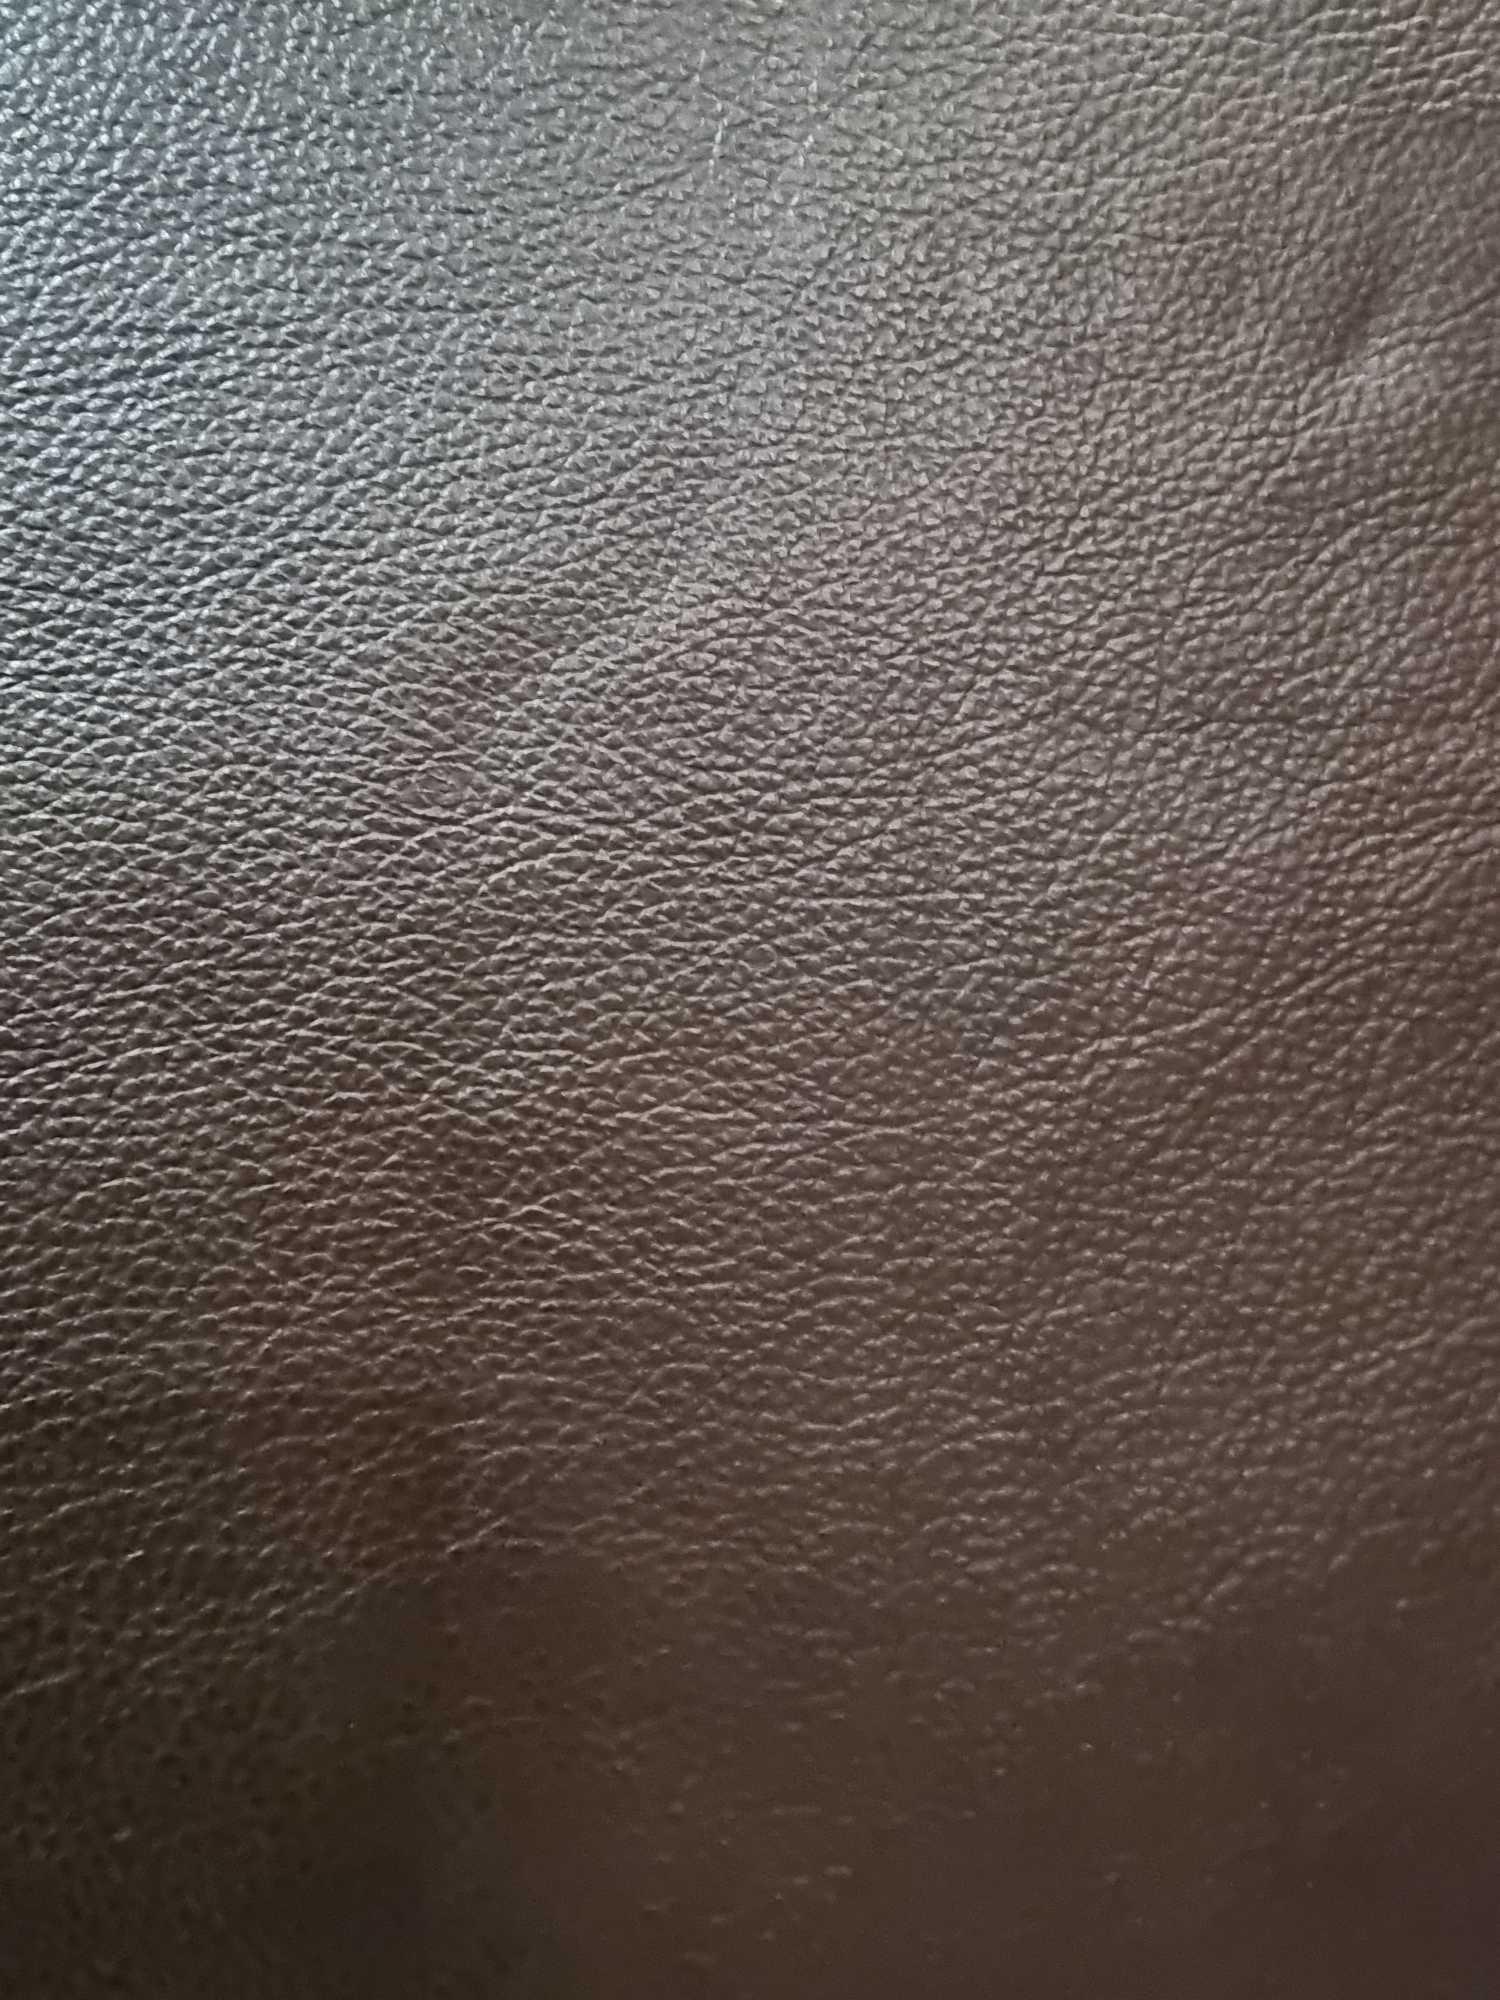 Chocolate Leather Hide approximately 3 78M2 2 1 x 1 8cm ( Hide No,150) - Image 2 of 3